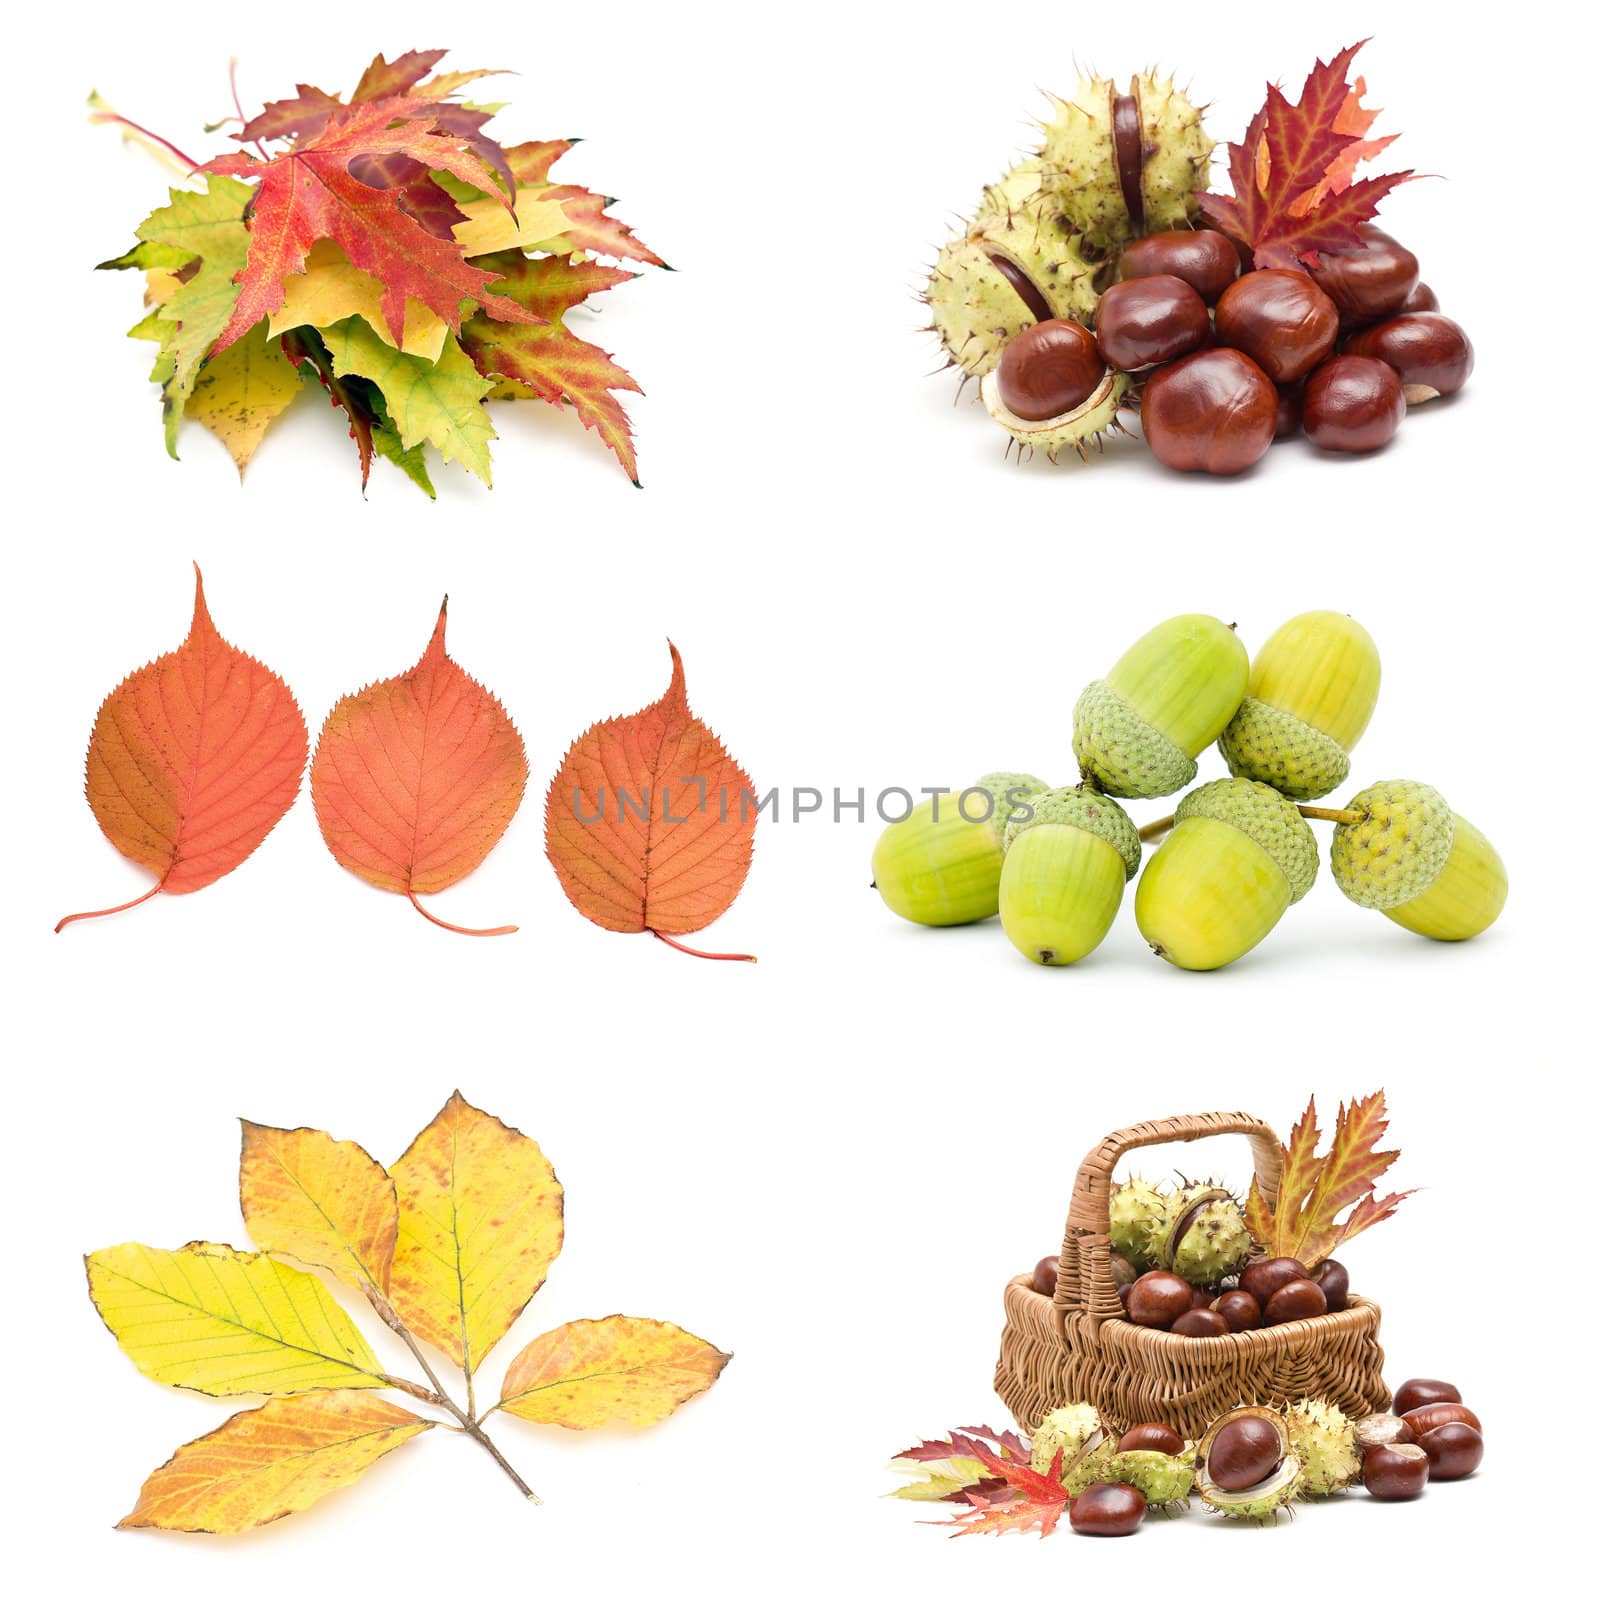 Collage from different autumn leaves, chestnuts and acorns by miradrozdowski